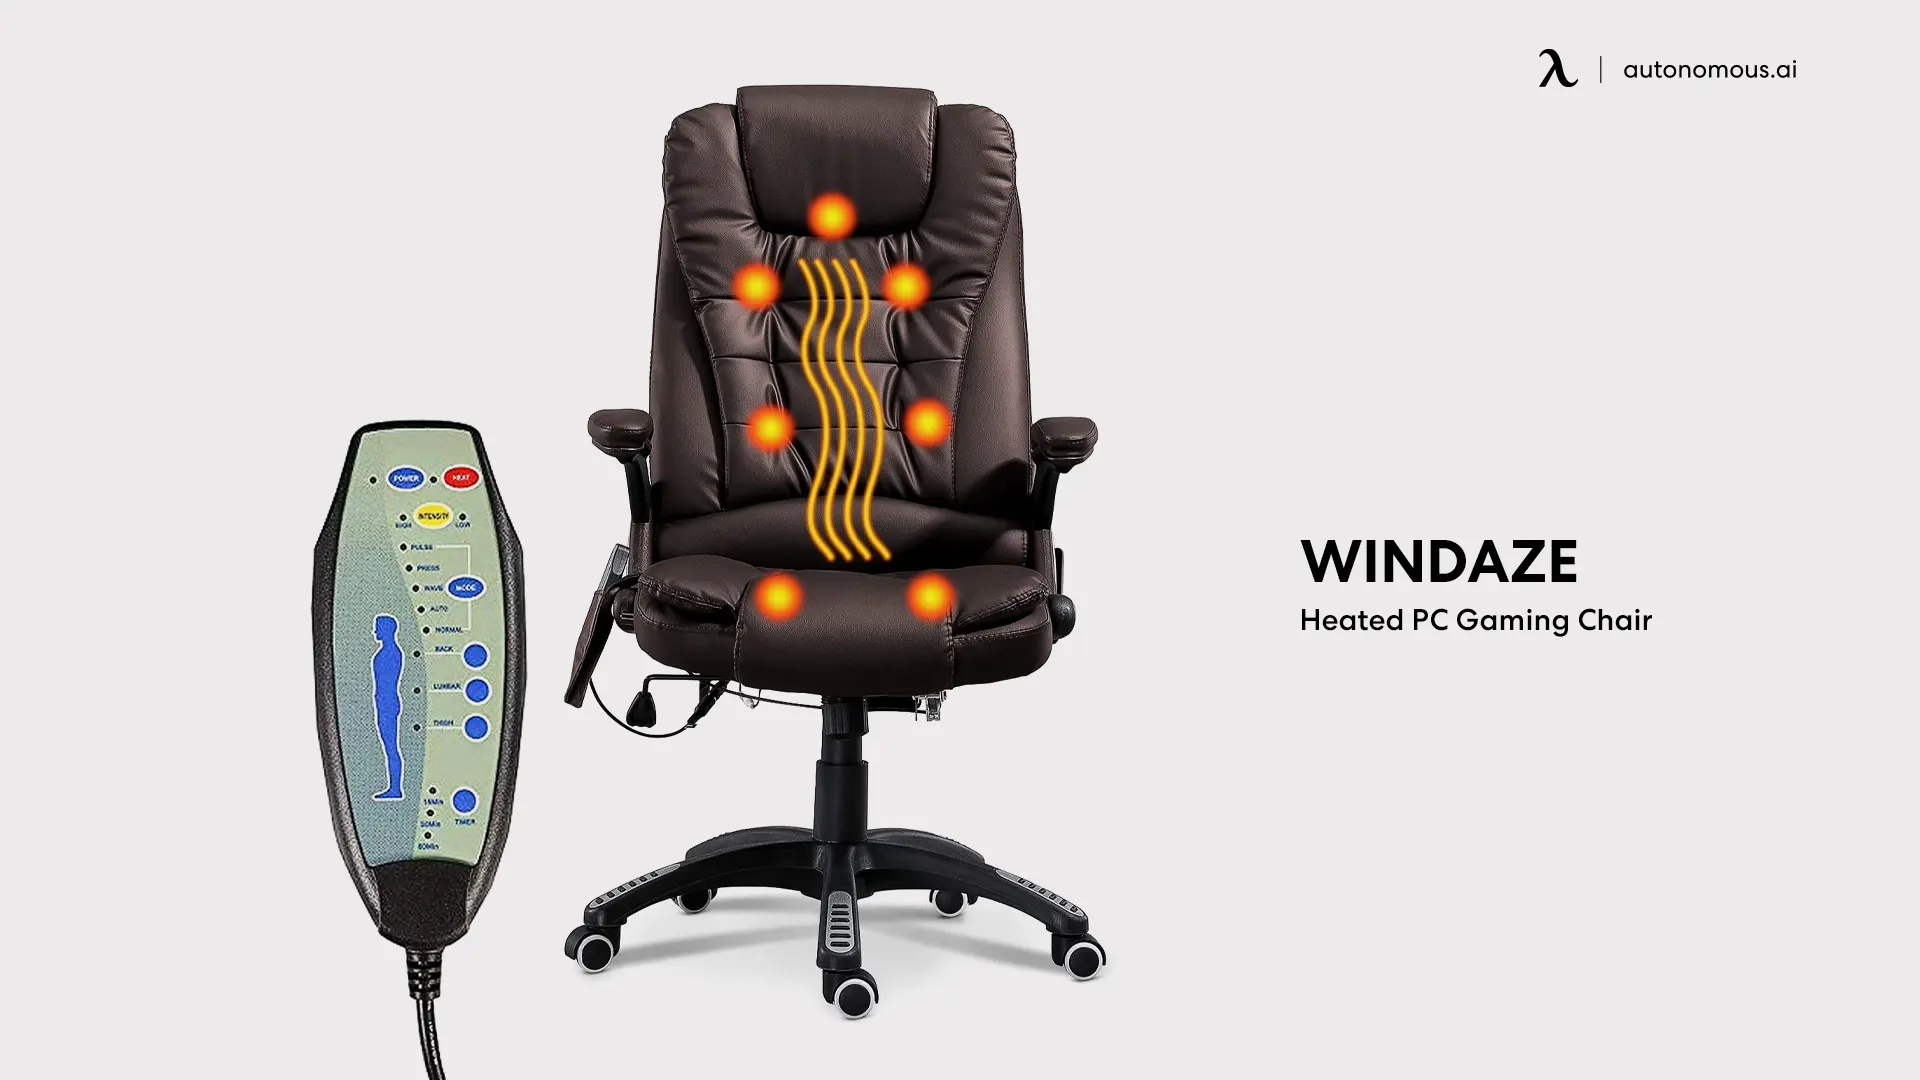 Windaze Heated PC Gaming Chair